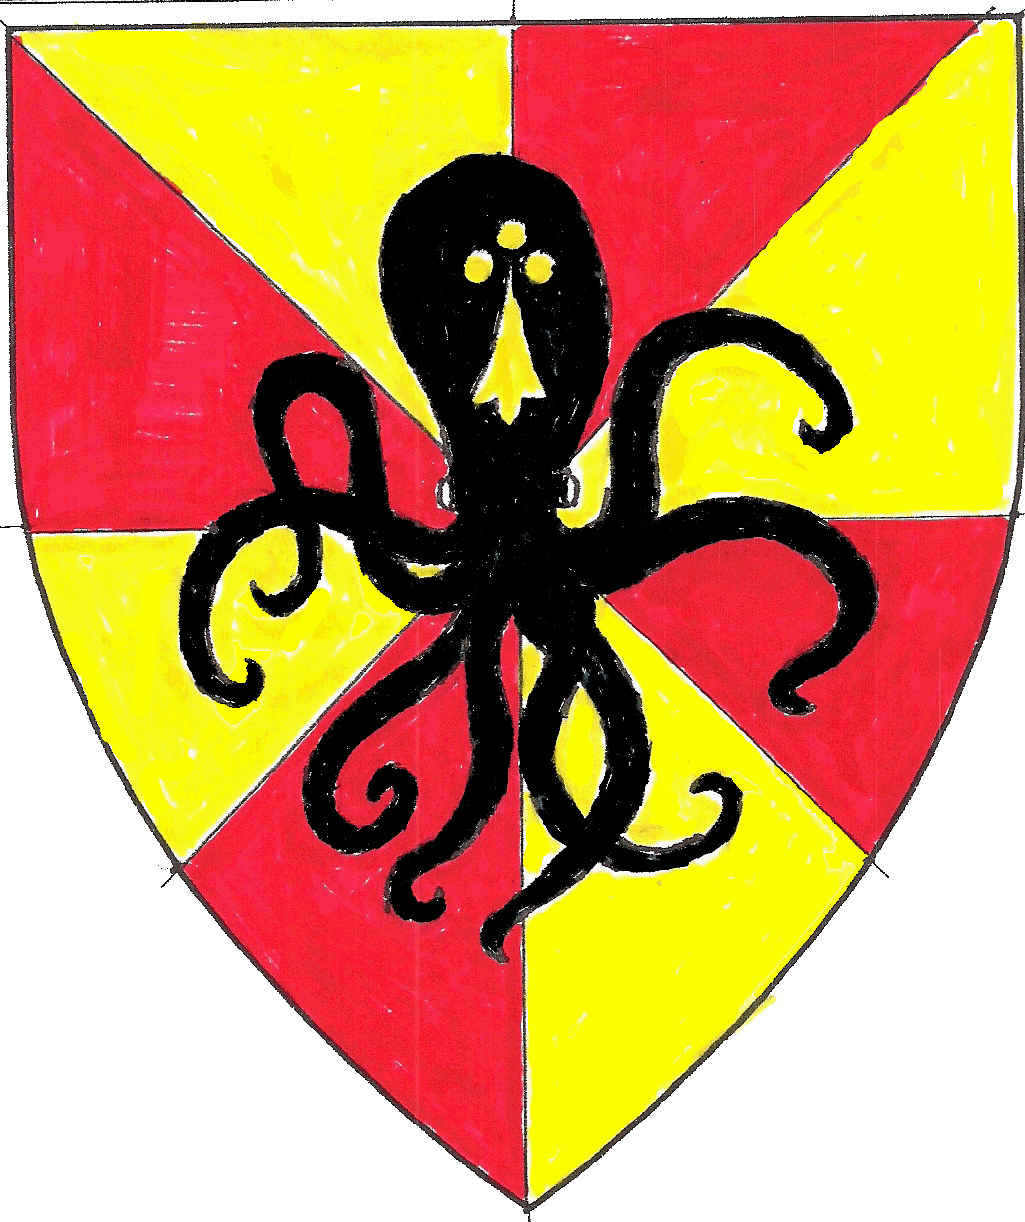 The arms of Oddr Onesocke